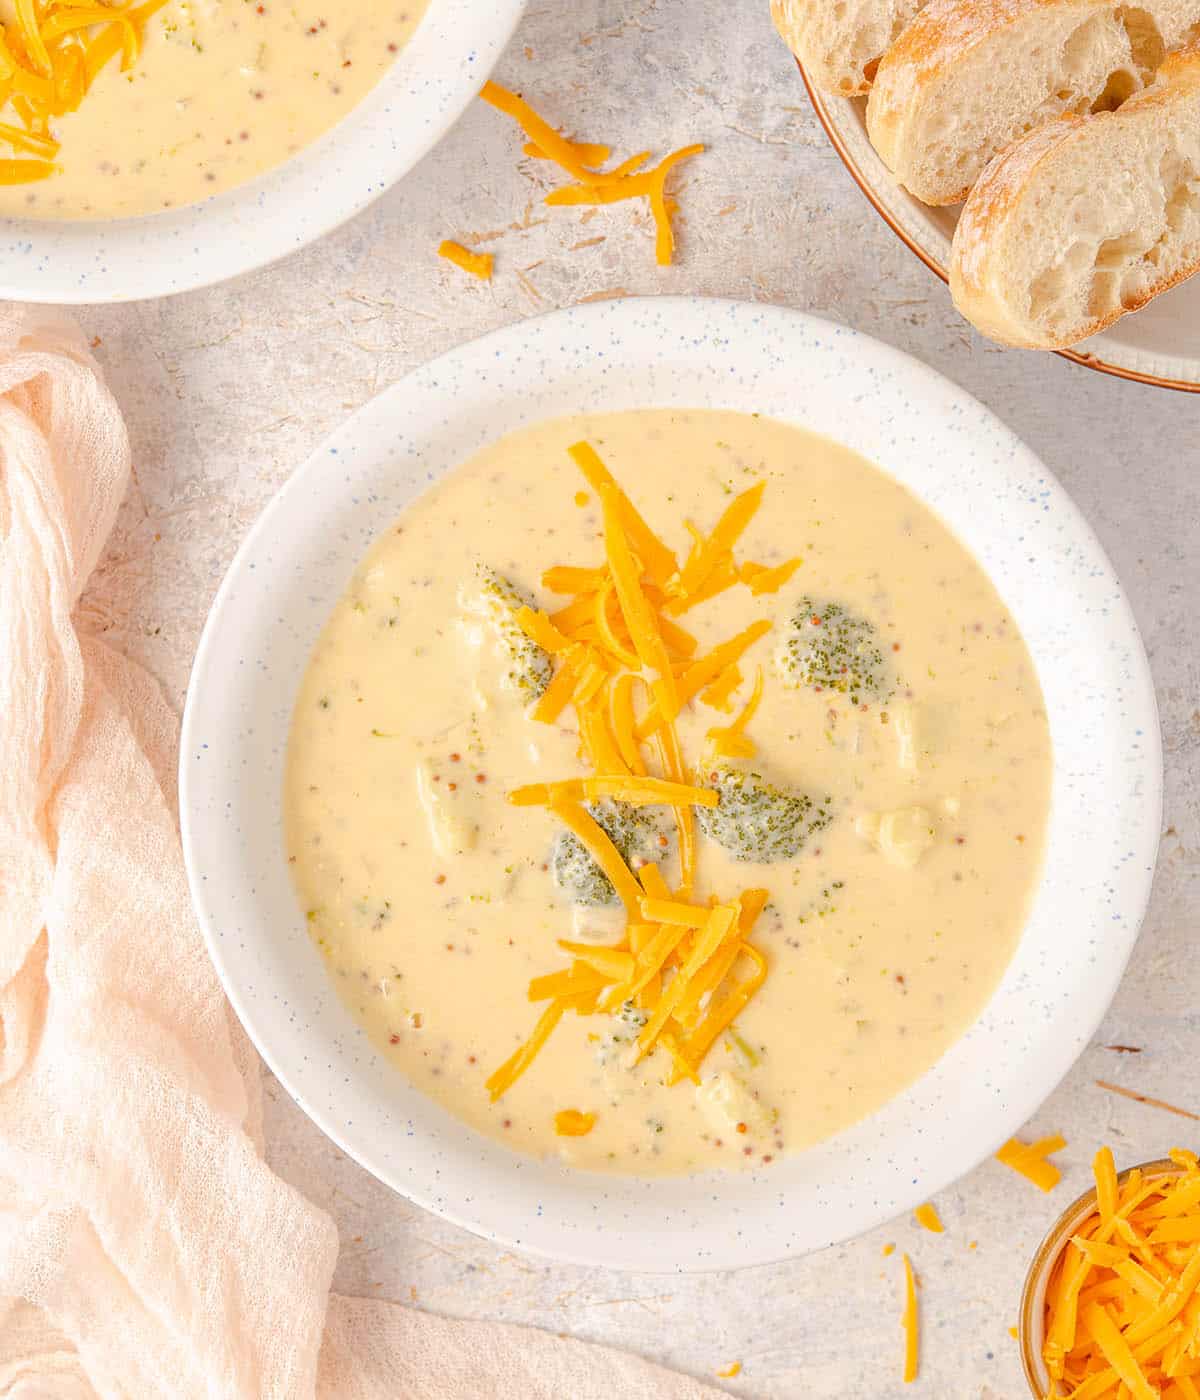 A bowl of broccoli cheese soup with shredded cheddar on top.